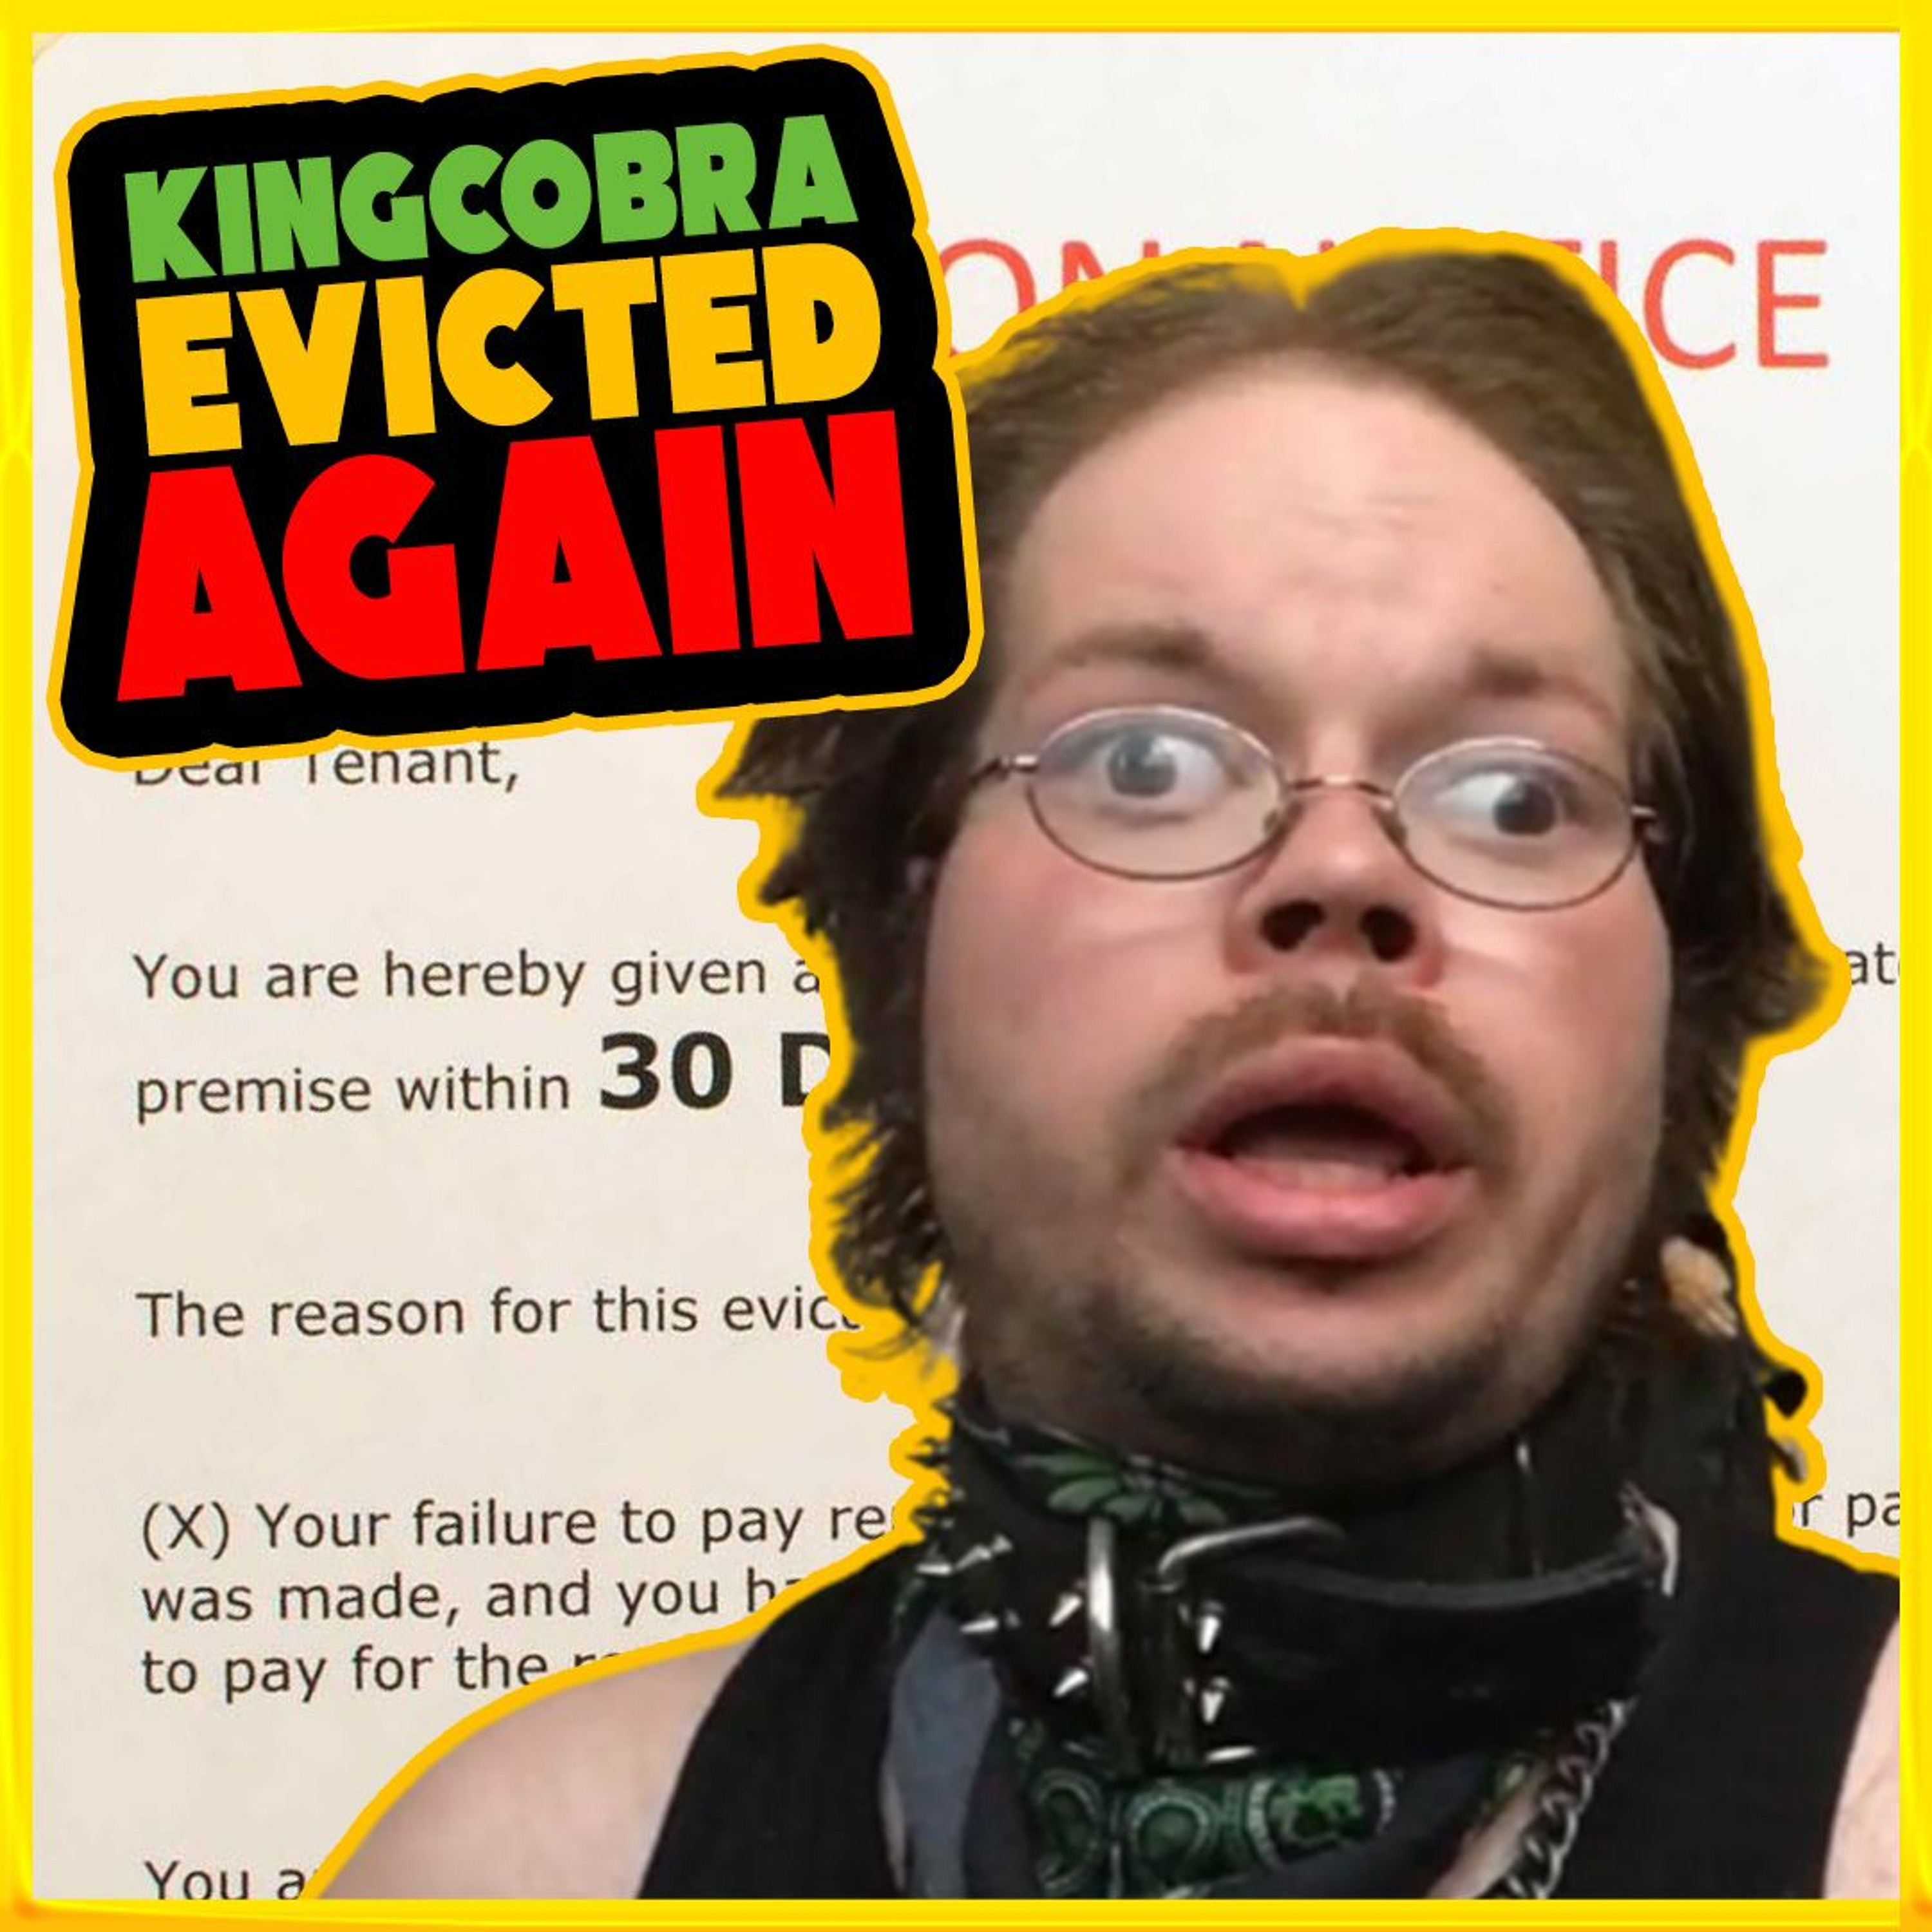 KingCobraJFS EVICTED AGAIN - Gail’s APOLOGY VIDEO? - Manatee FROM the PAST | 1326